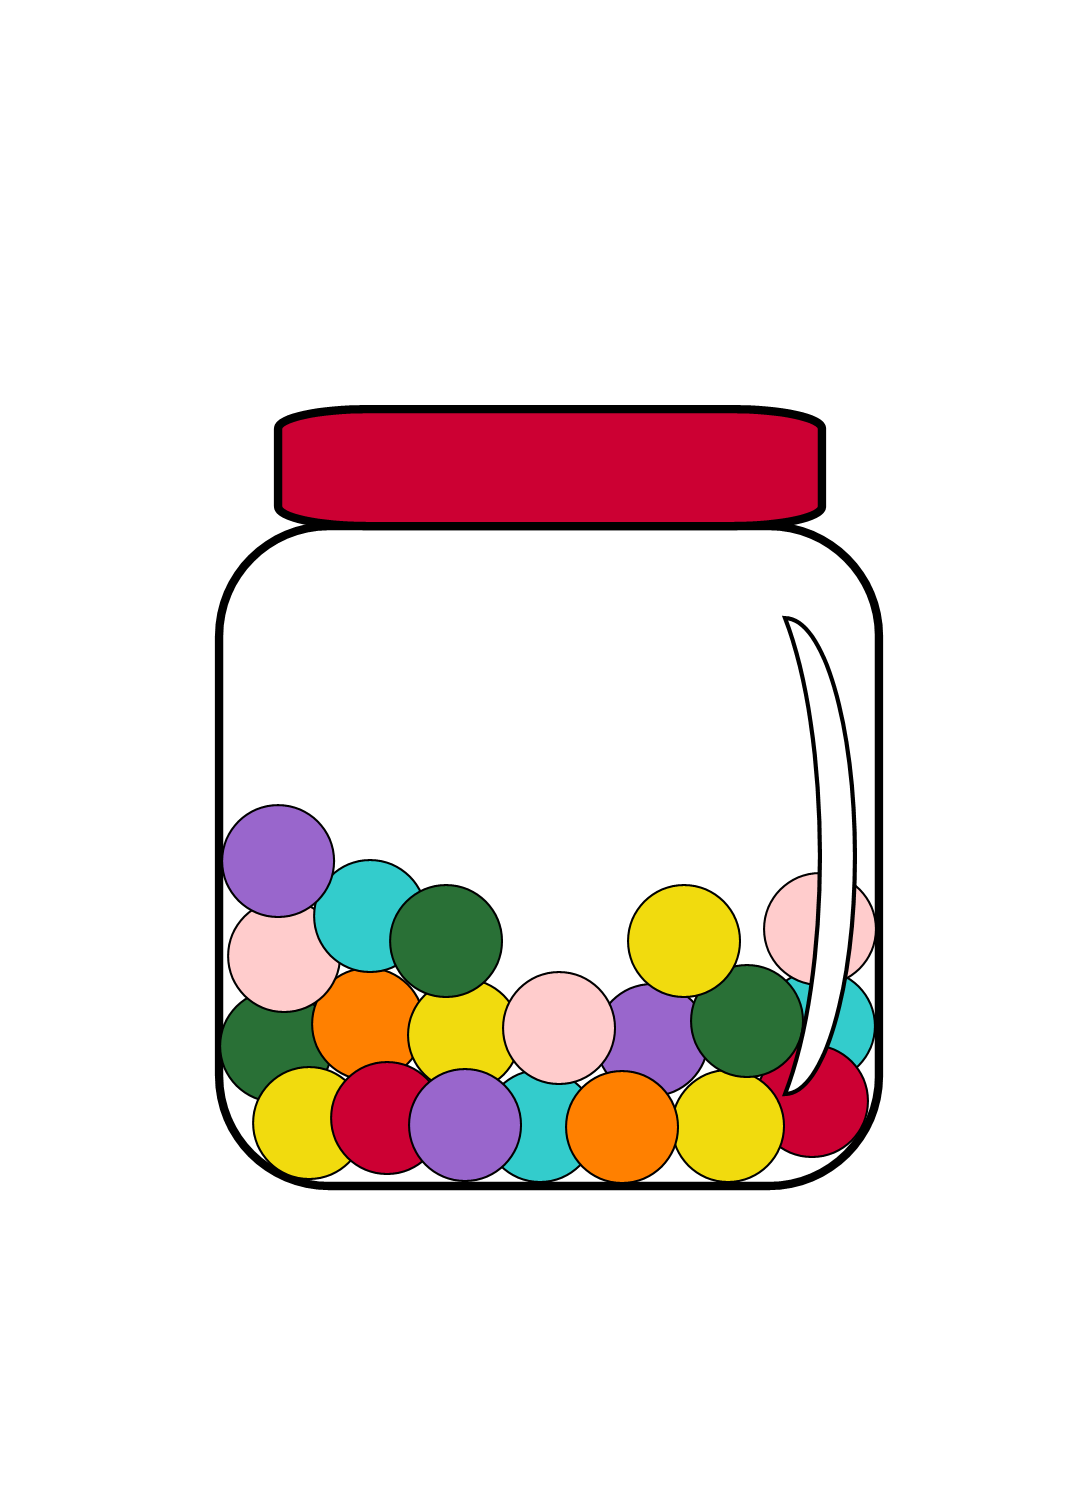 Free candy jar clip art. Candy jar half full of colorful candy or bubble gum